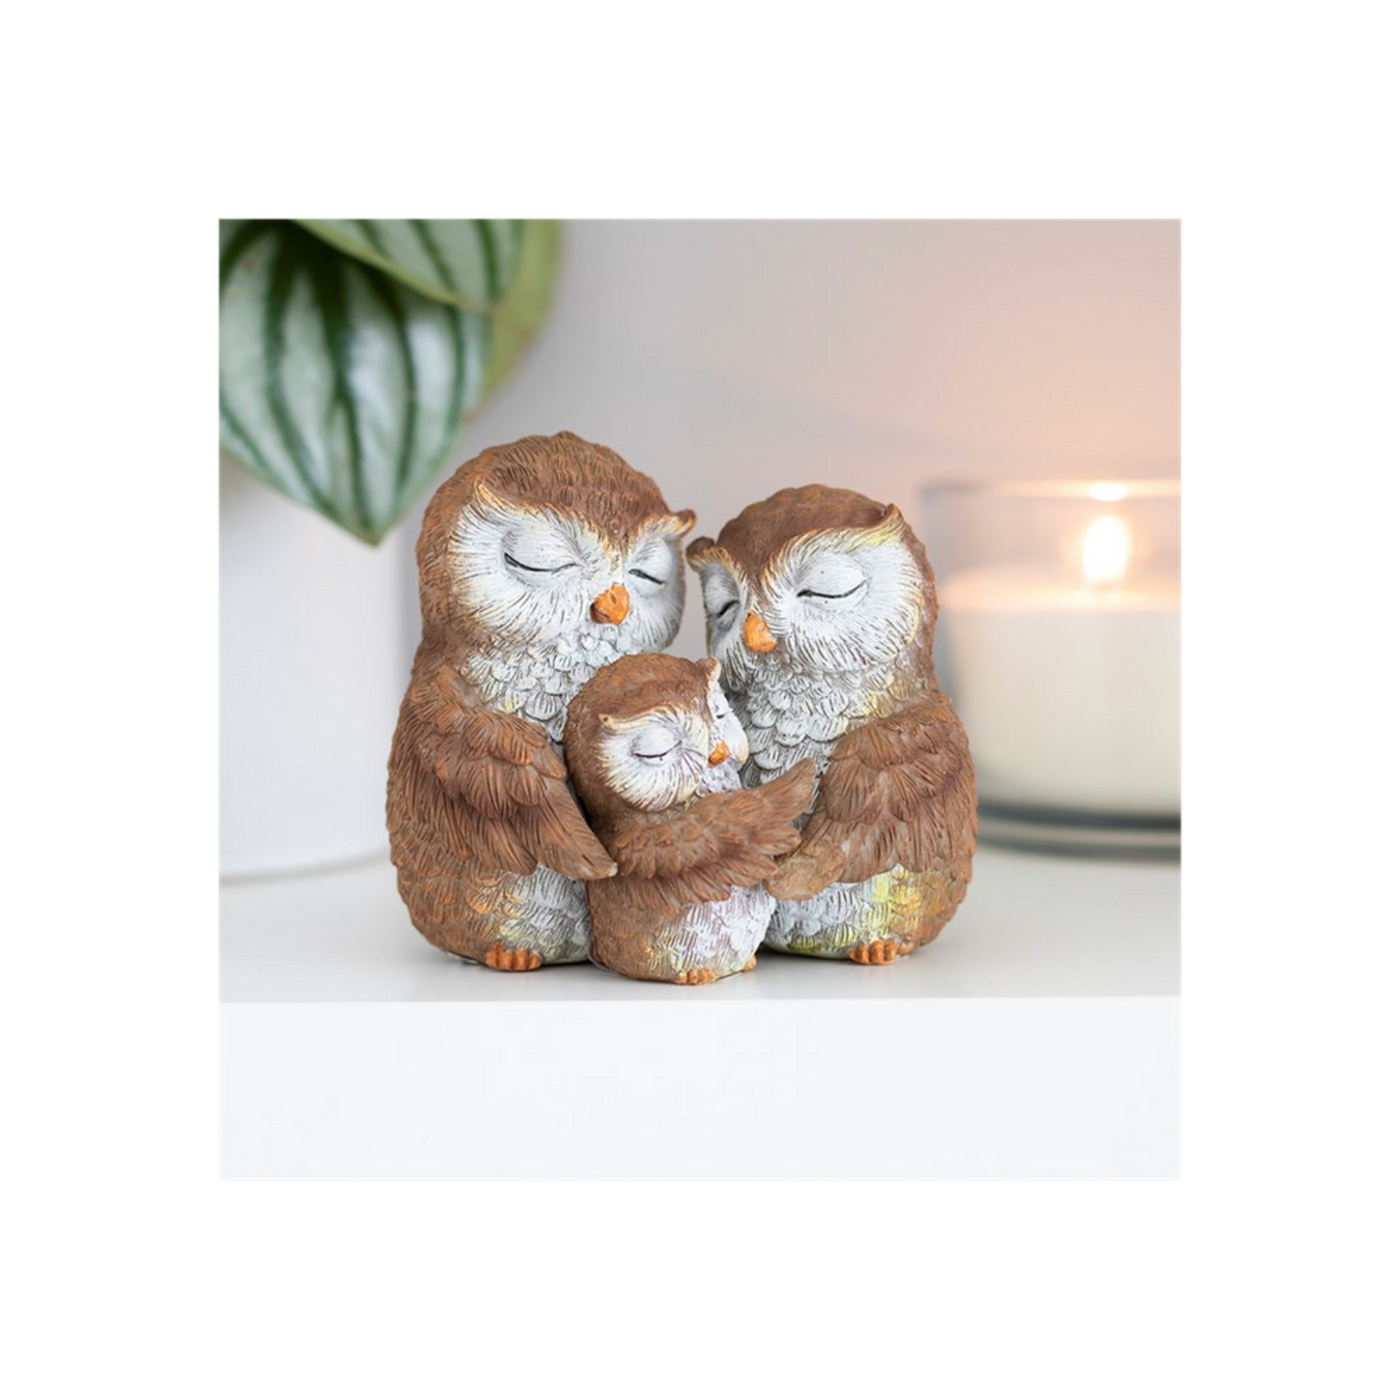 Owl-ways Be Together Owl Family Decorative Home Ornament.